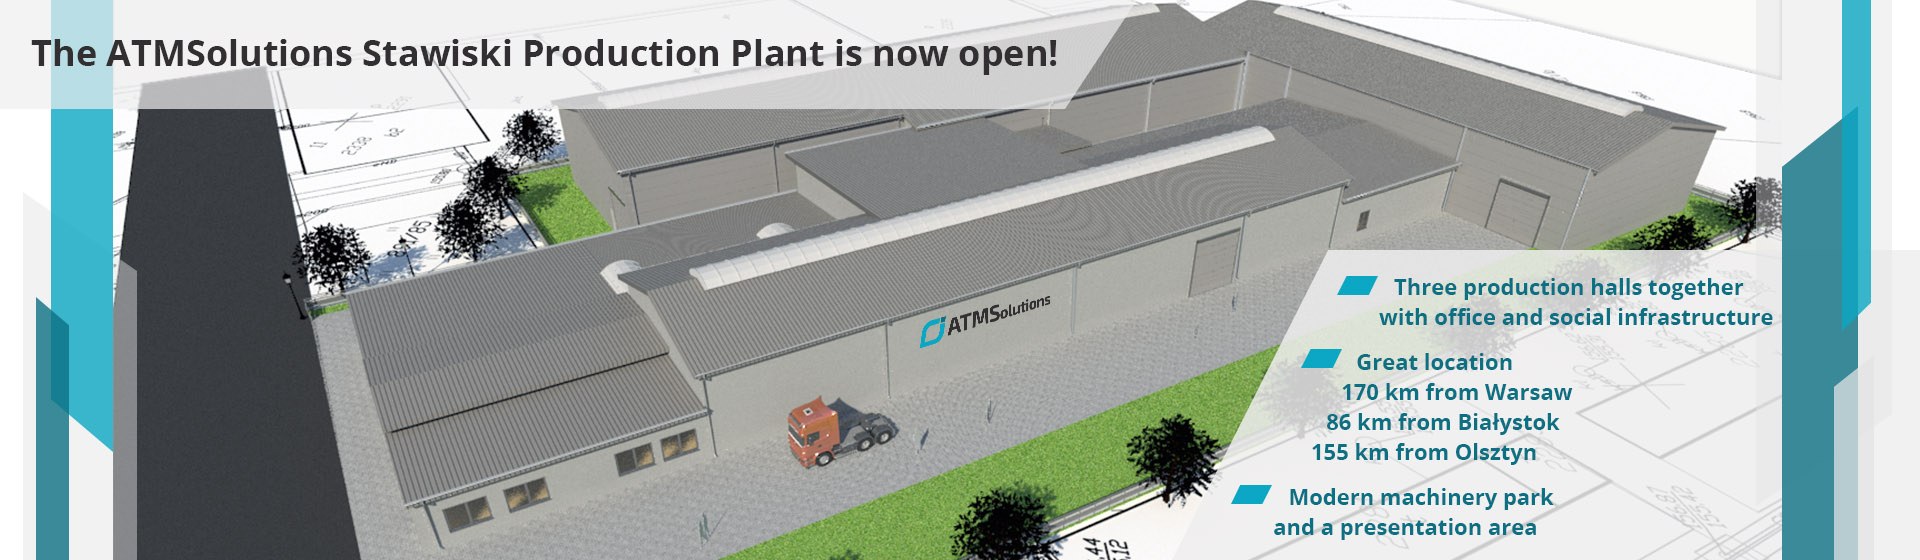 Construction of the ATMSolutions Stawiski production plant